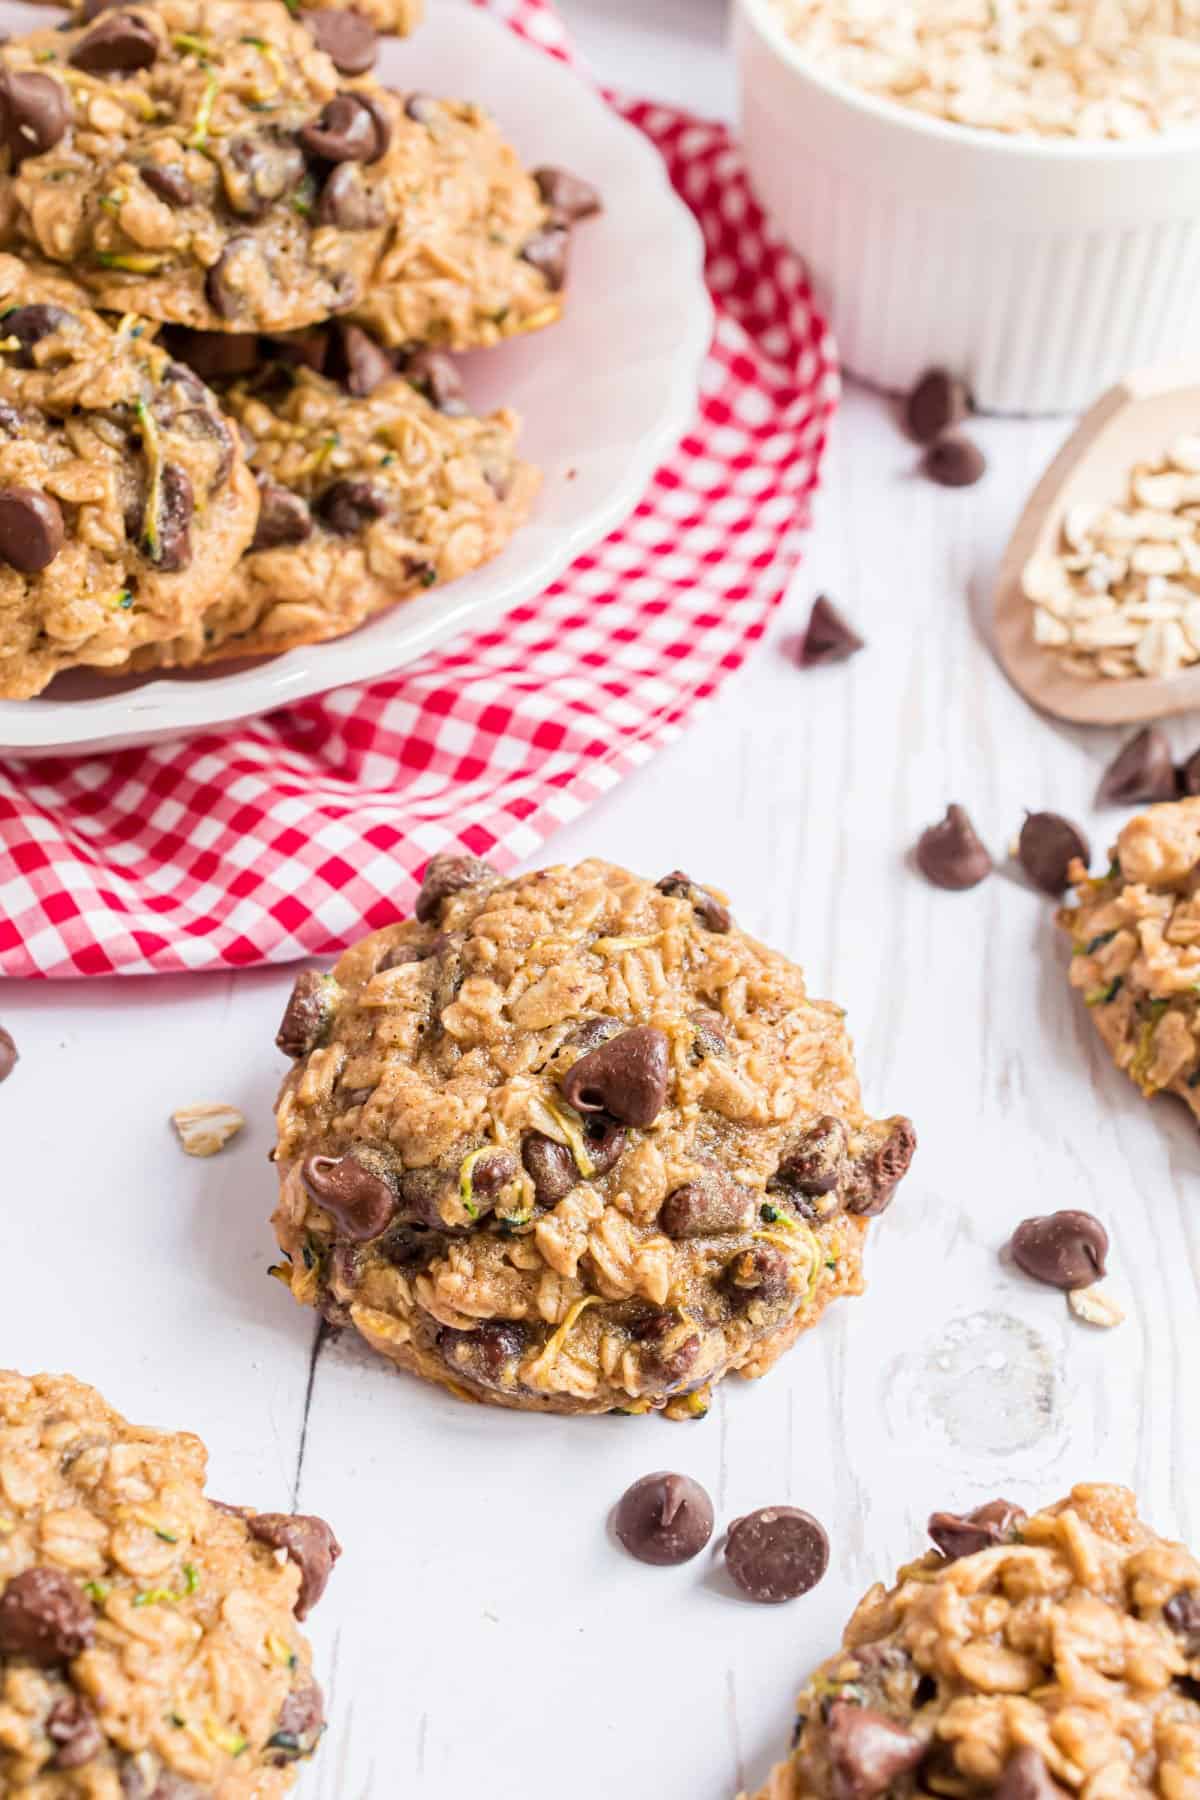 Oatmeal chocolate chip zucchini cookies on wooden table.